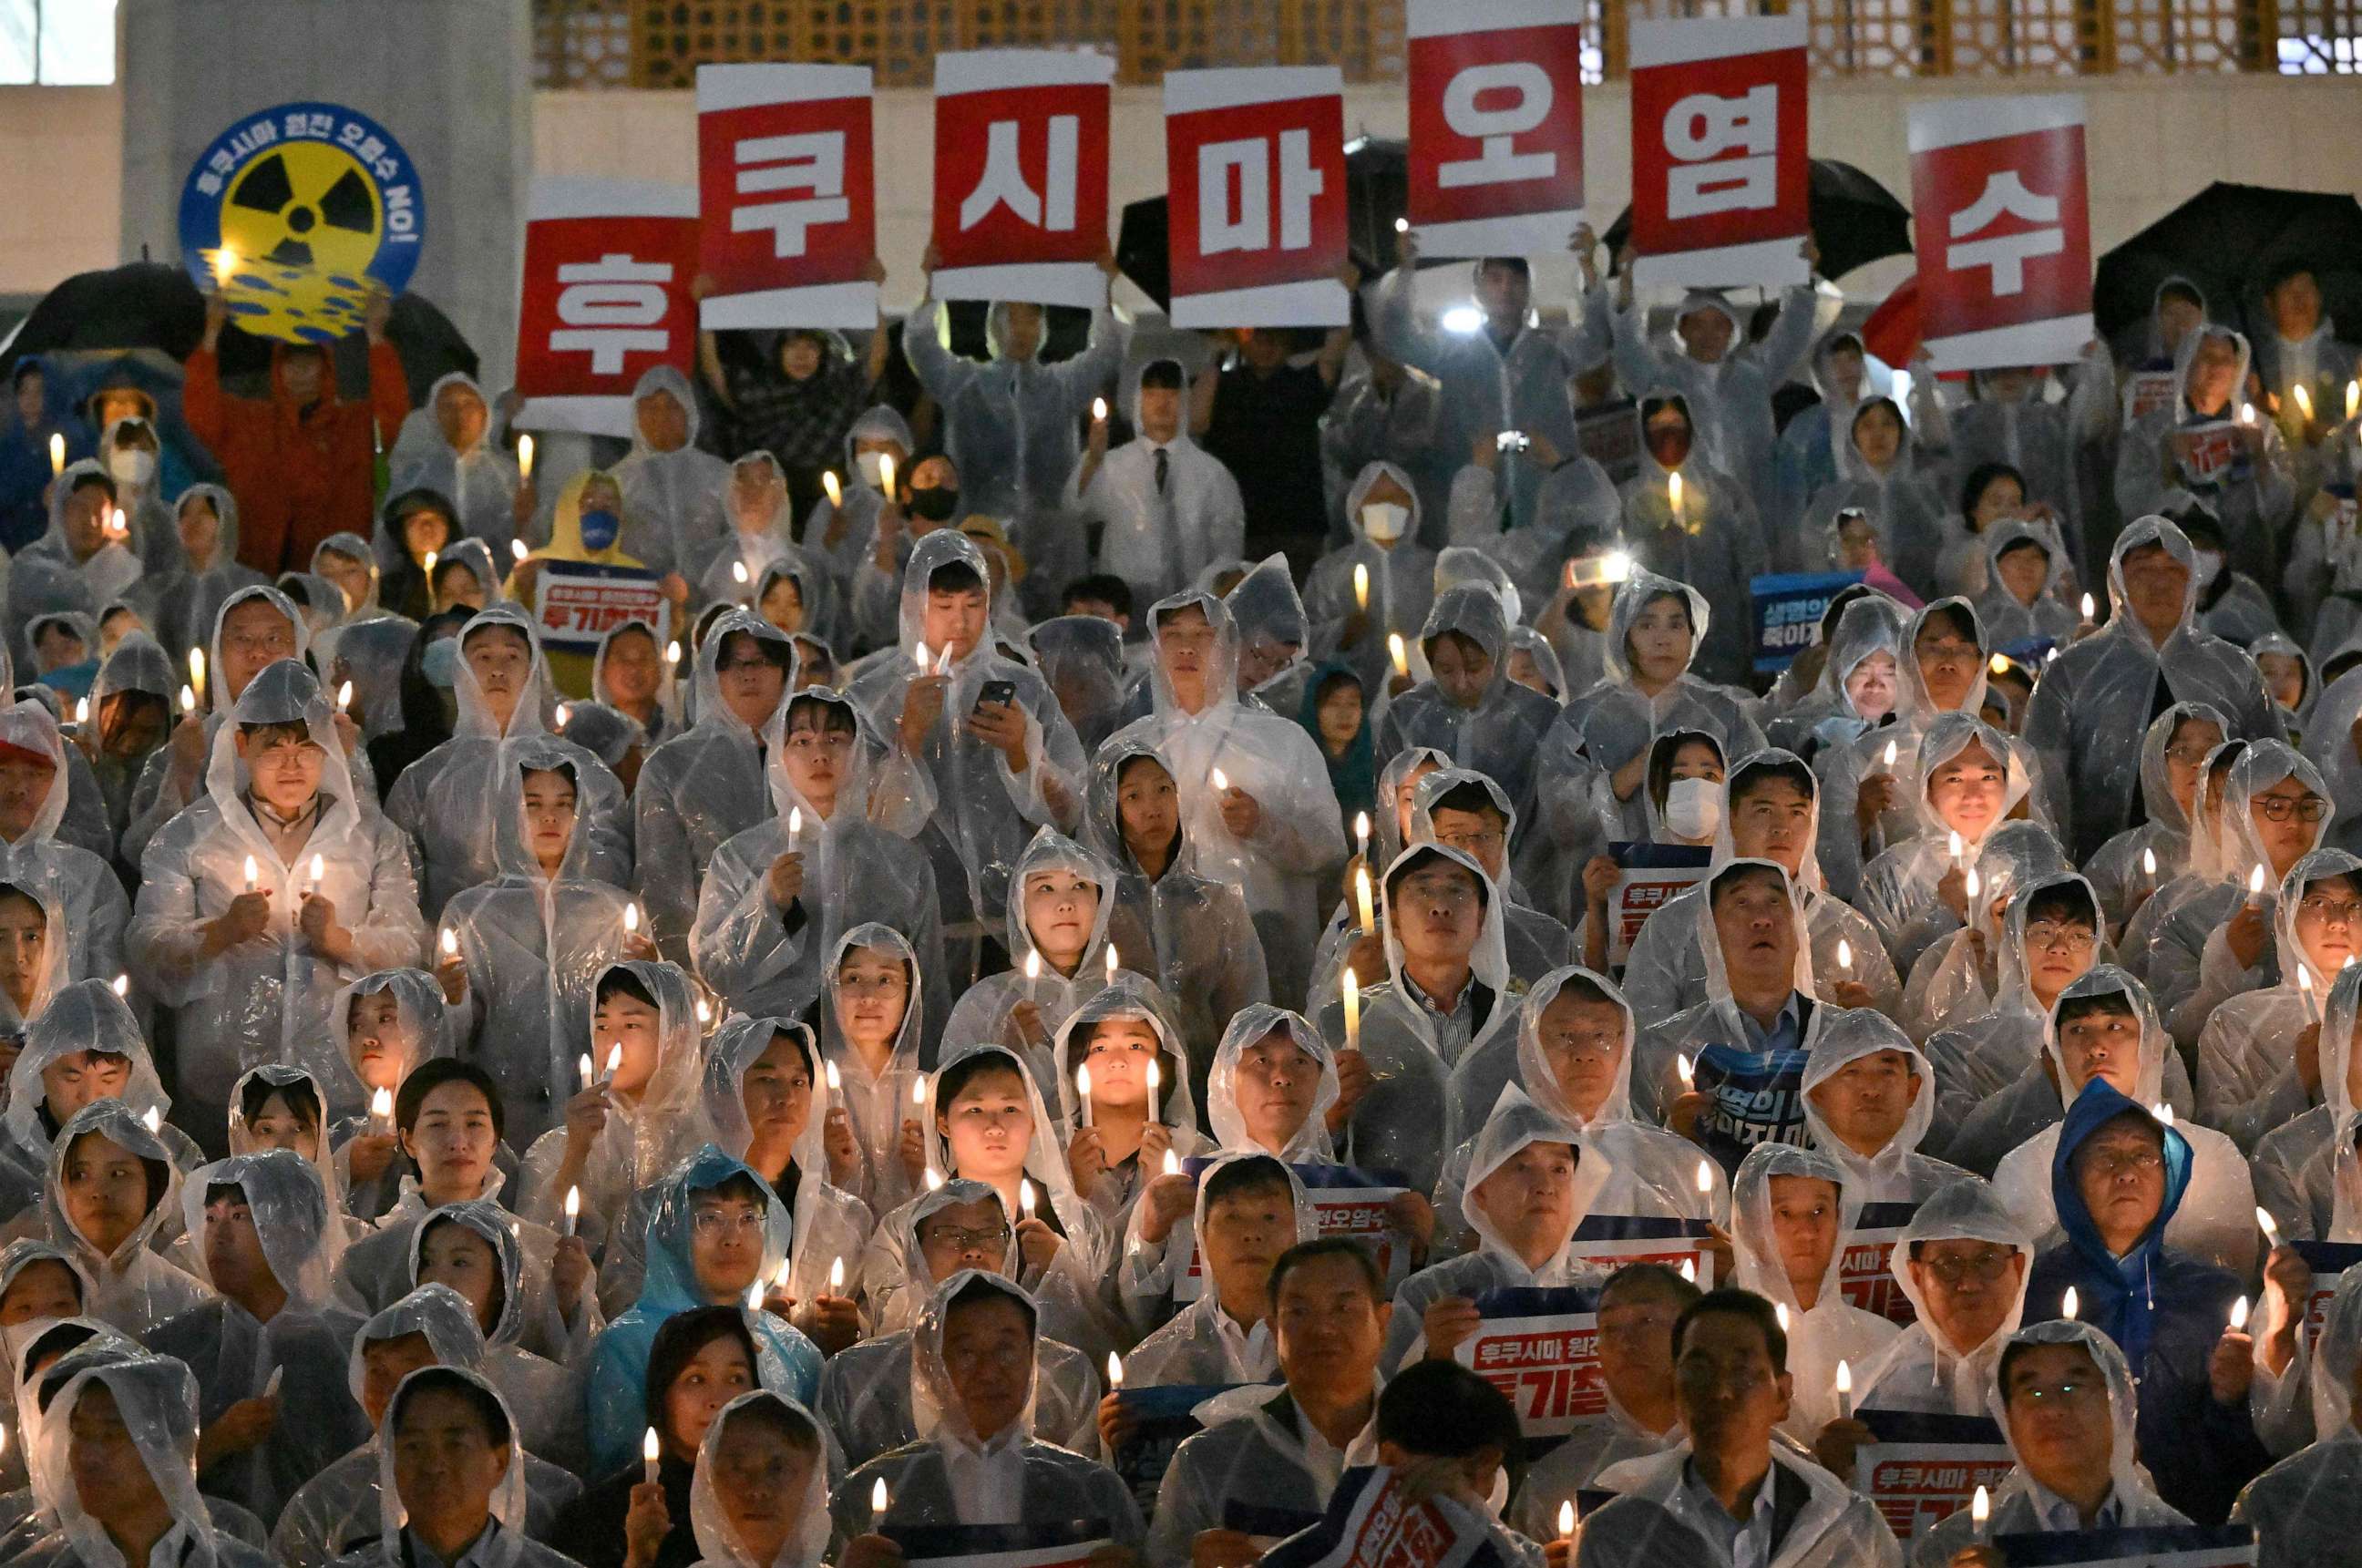 PHOTO: South Korea's main opposition Democratic Party members hold signs reading "Fukushima contaminated water" during a rally against Japan's plan to release treated water from Fukushima, at the National Assembly in Seoul on August 23, 2023.